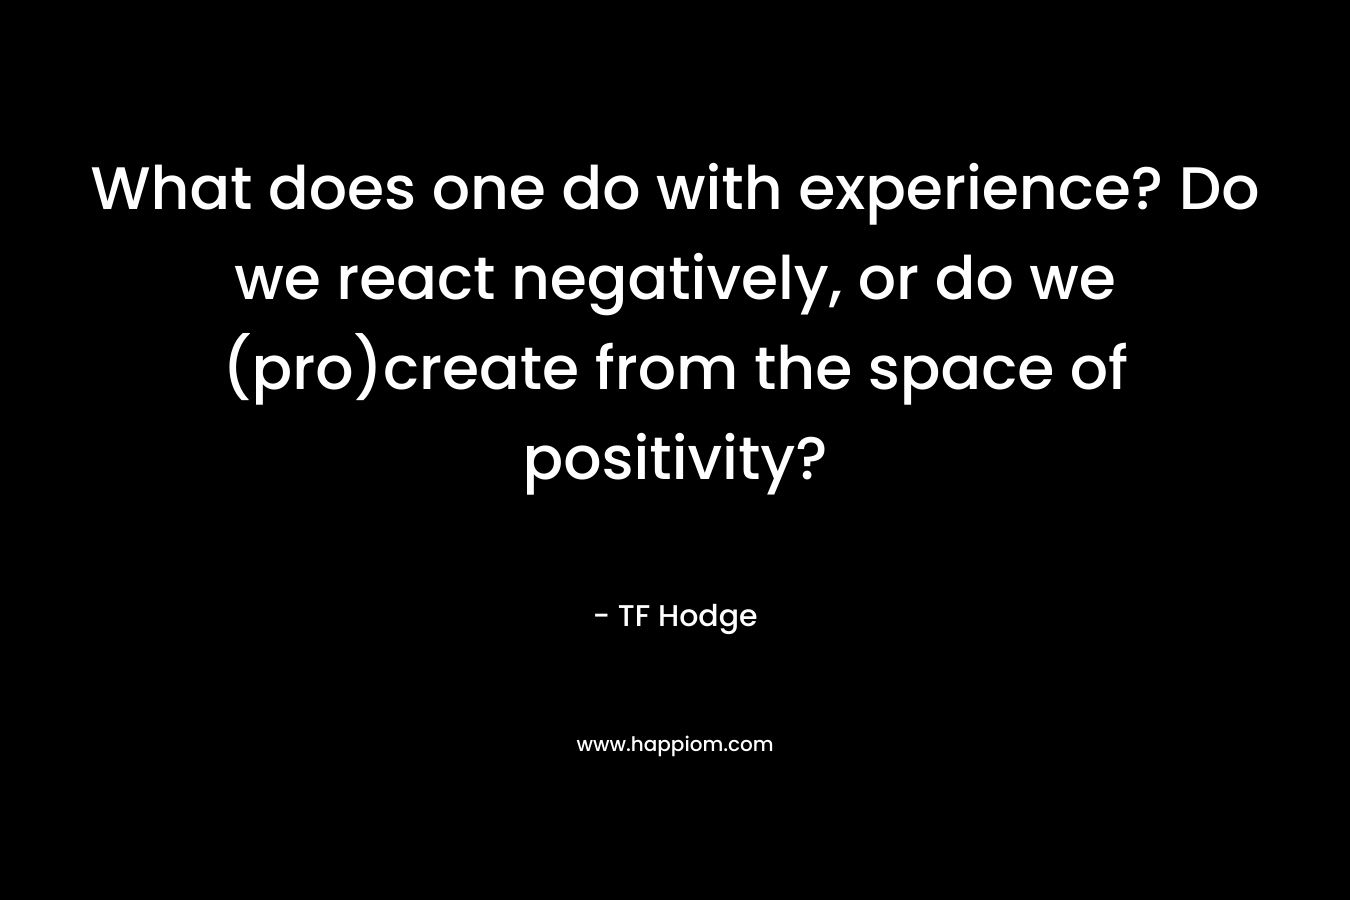 What does one do with experience? Do we react negatively, or do we (pro)create from the space of positivity? – TF Hodge